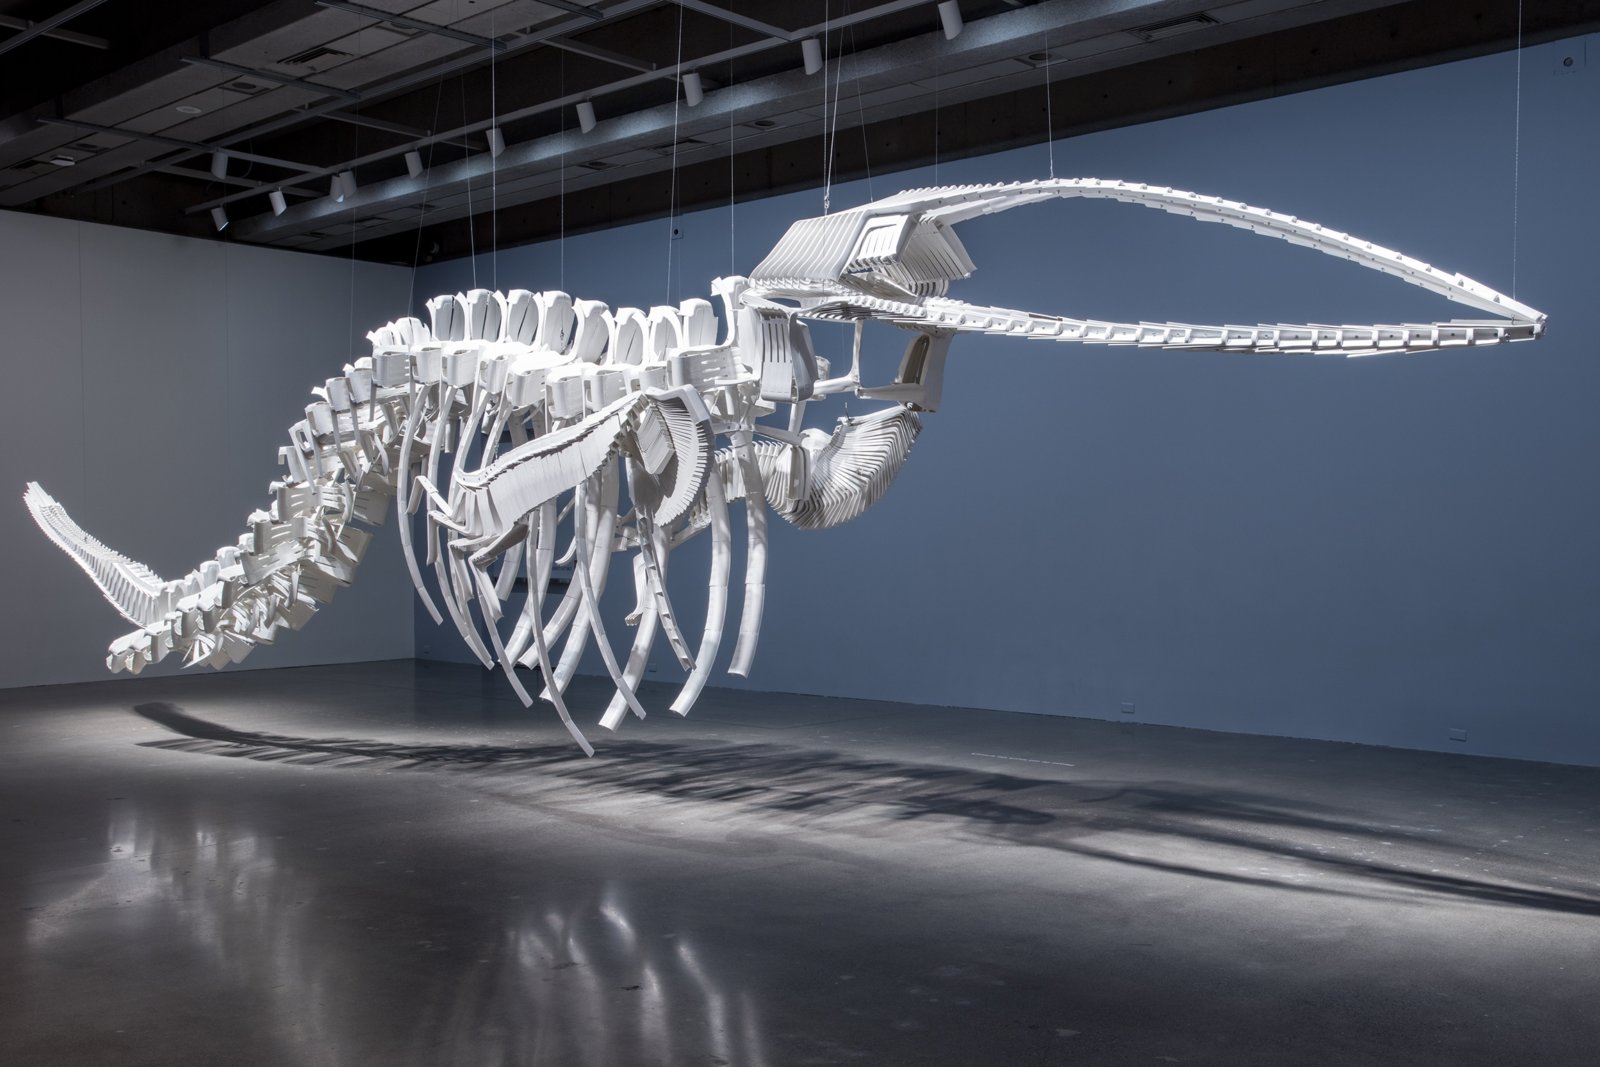 Brian Jungen, Cetology, 2002, plastic chairs, 159 x 166 x 587 in. (404 x 422 x 1491 cm). Installation view, Friendship Centre, Art Gallery of Ontario, Toronto, Canada, 2019